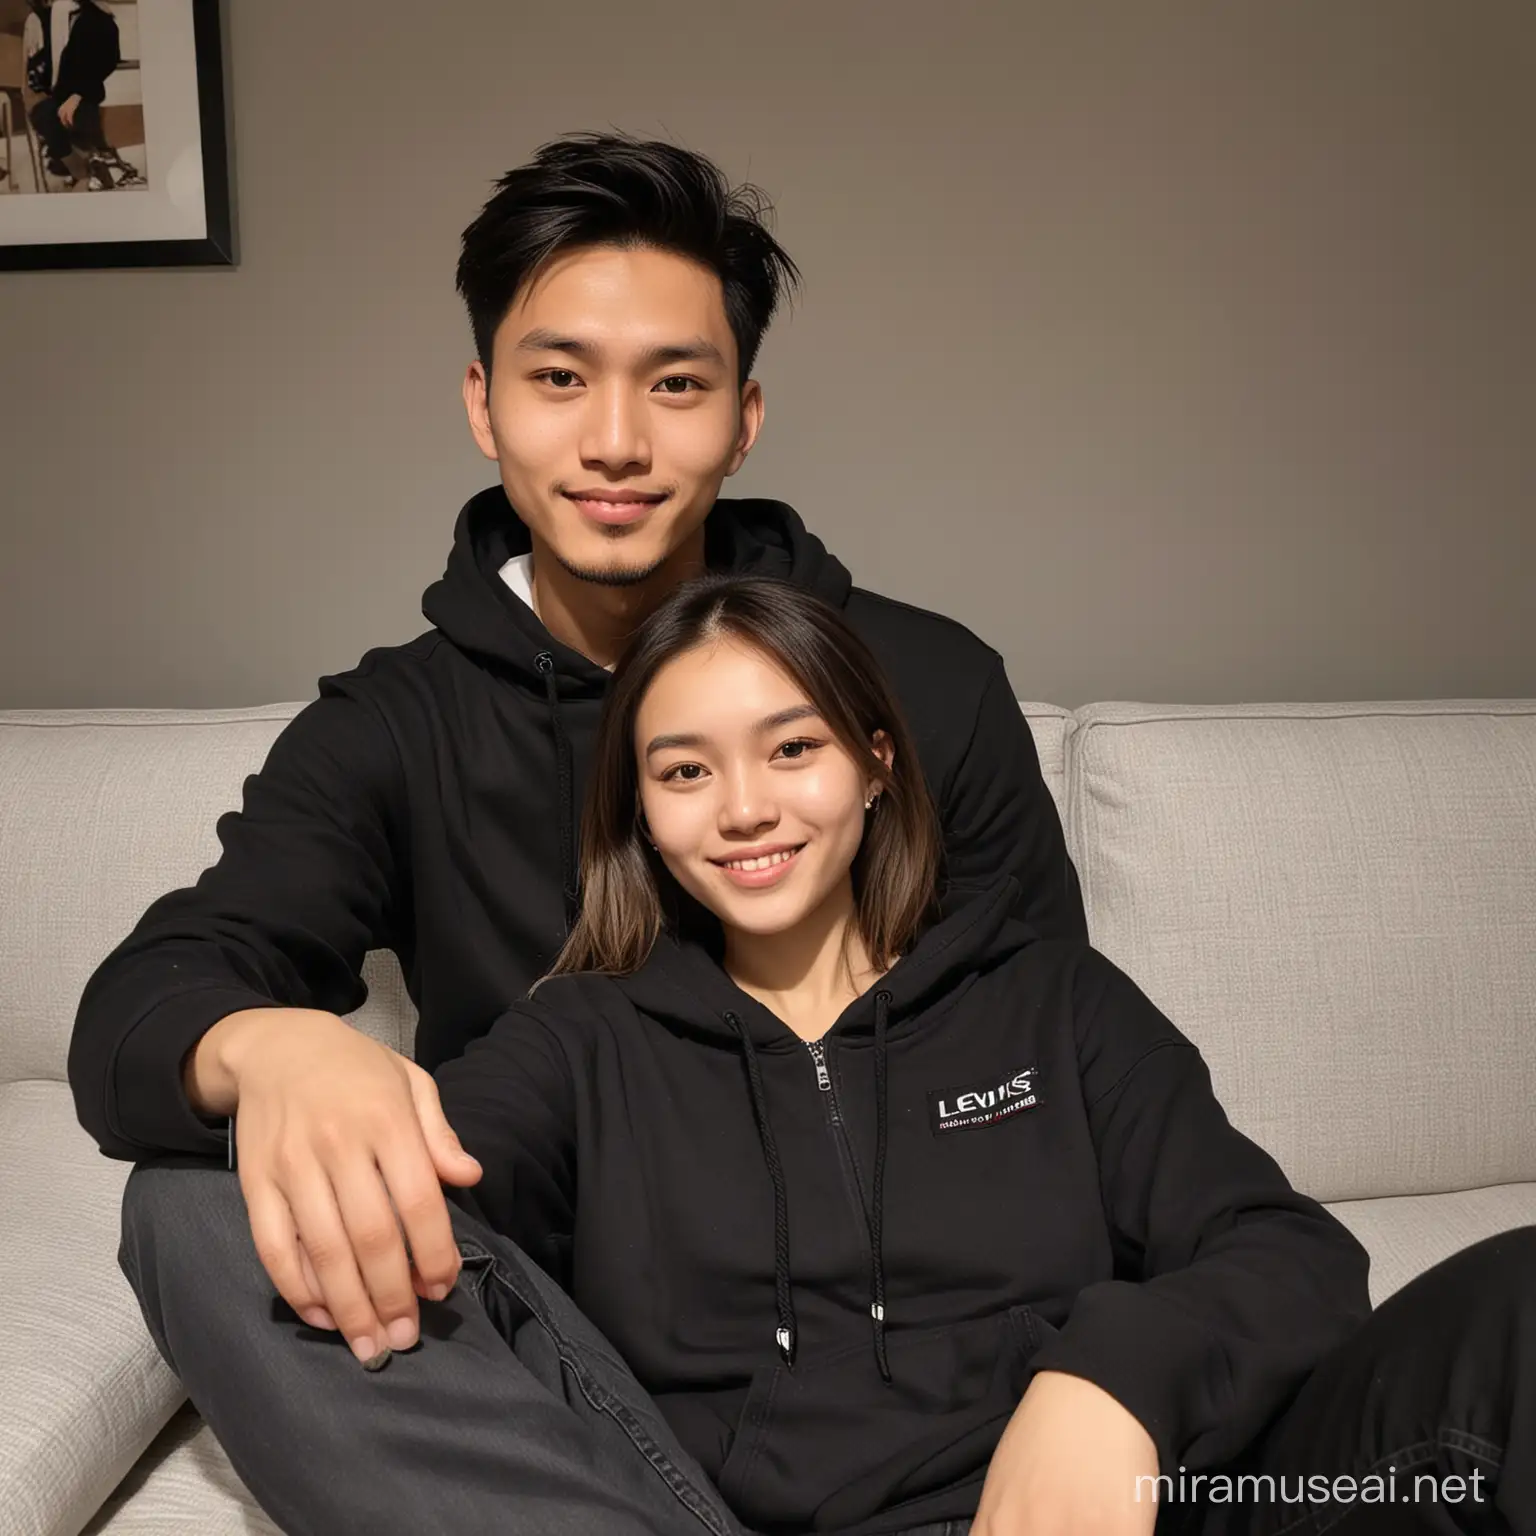 A man is sitting with a 20-year-old woman from Southeast Asia on a sofa inside a house, taking a selfie. The man has a tan complexion and a small body. His hair is thin and very short, combed very neatly. His face is oval-shaped. He is wearing a black hoodie jacket and slim-fit black Levi's pants. As for the woman, she has fair skin and a petite body. Her hair is long and tidy. She is also wearing a black hoodie jacket and slim-fit black Levi's pants. The background is a gray wall. It is evident that they are very happy in the nighttime atmosphere.